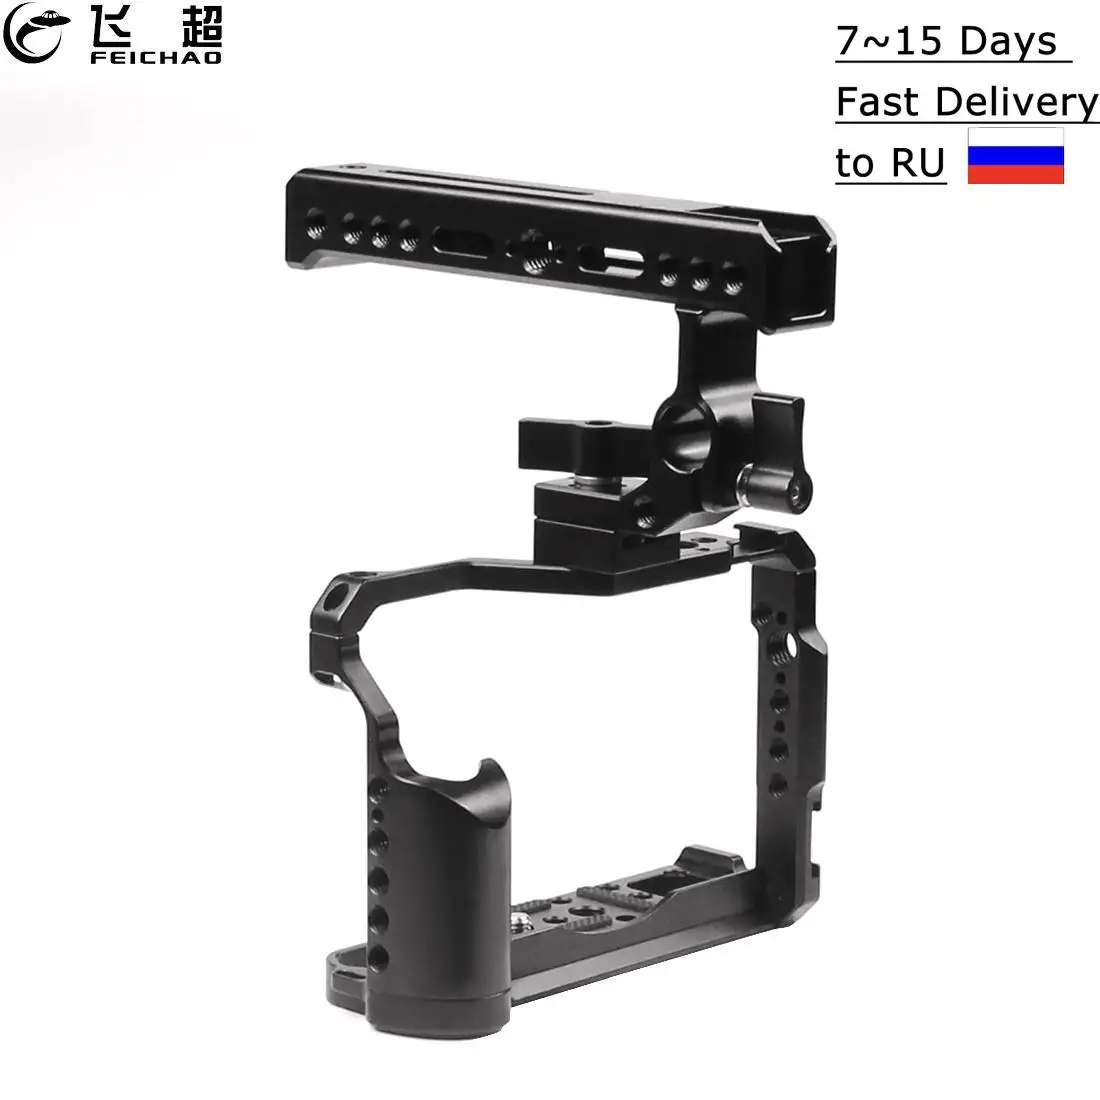 XT20 XT30 Camera Cage Rig 1/4 3/8 Protective Frame Top Handle Grip 15MM Rail Hot Shoe Mount for Fujifilm XT-20 XT-30 Stabilizer